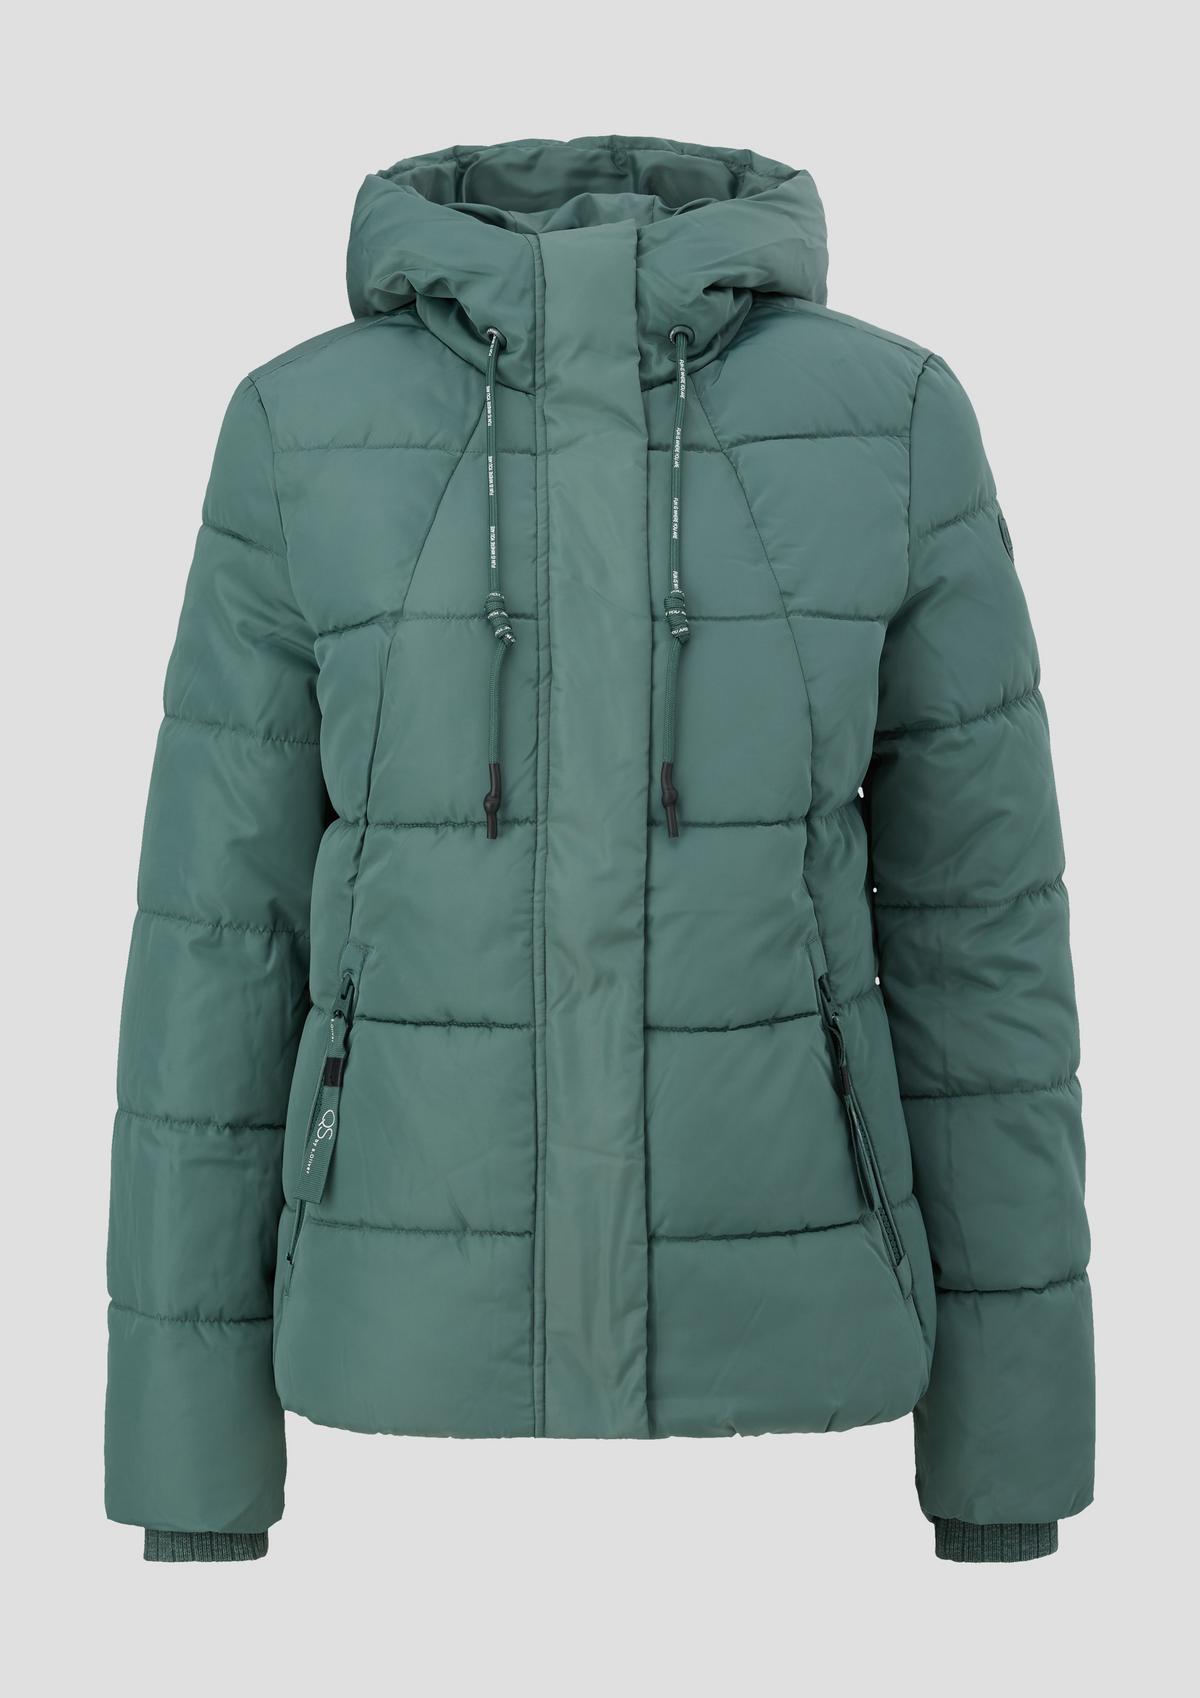 Quilted jacket ocean blue zip - with pockets